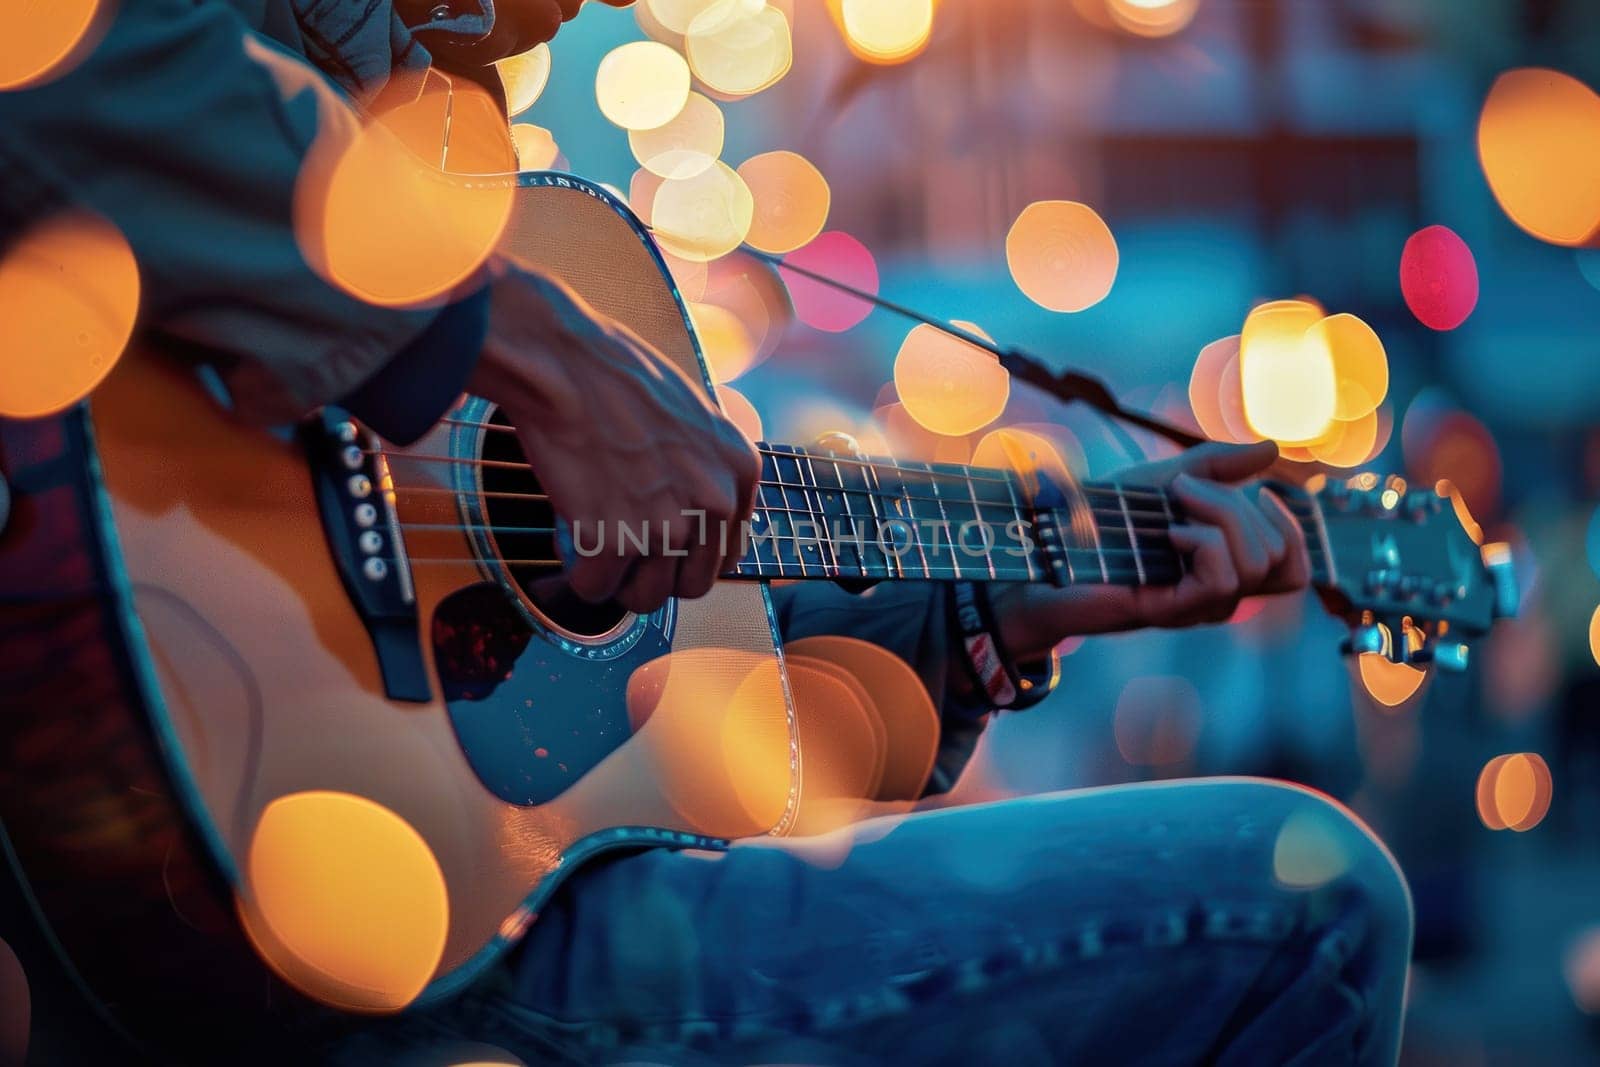 A man is playing a guitar in a city street. The lights in the background create a warm and inviting atmosphere